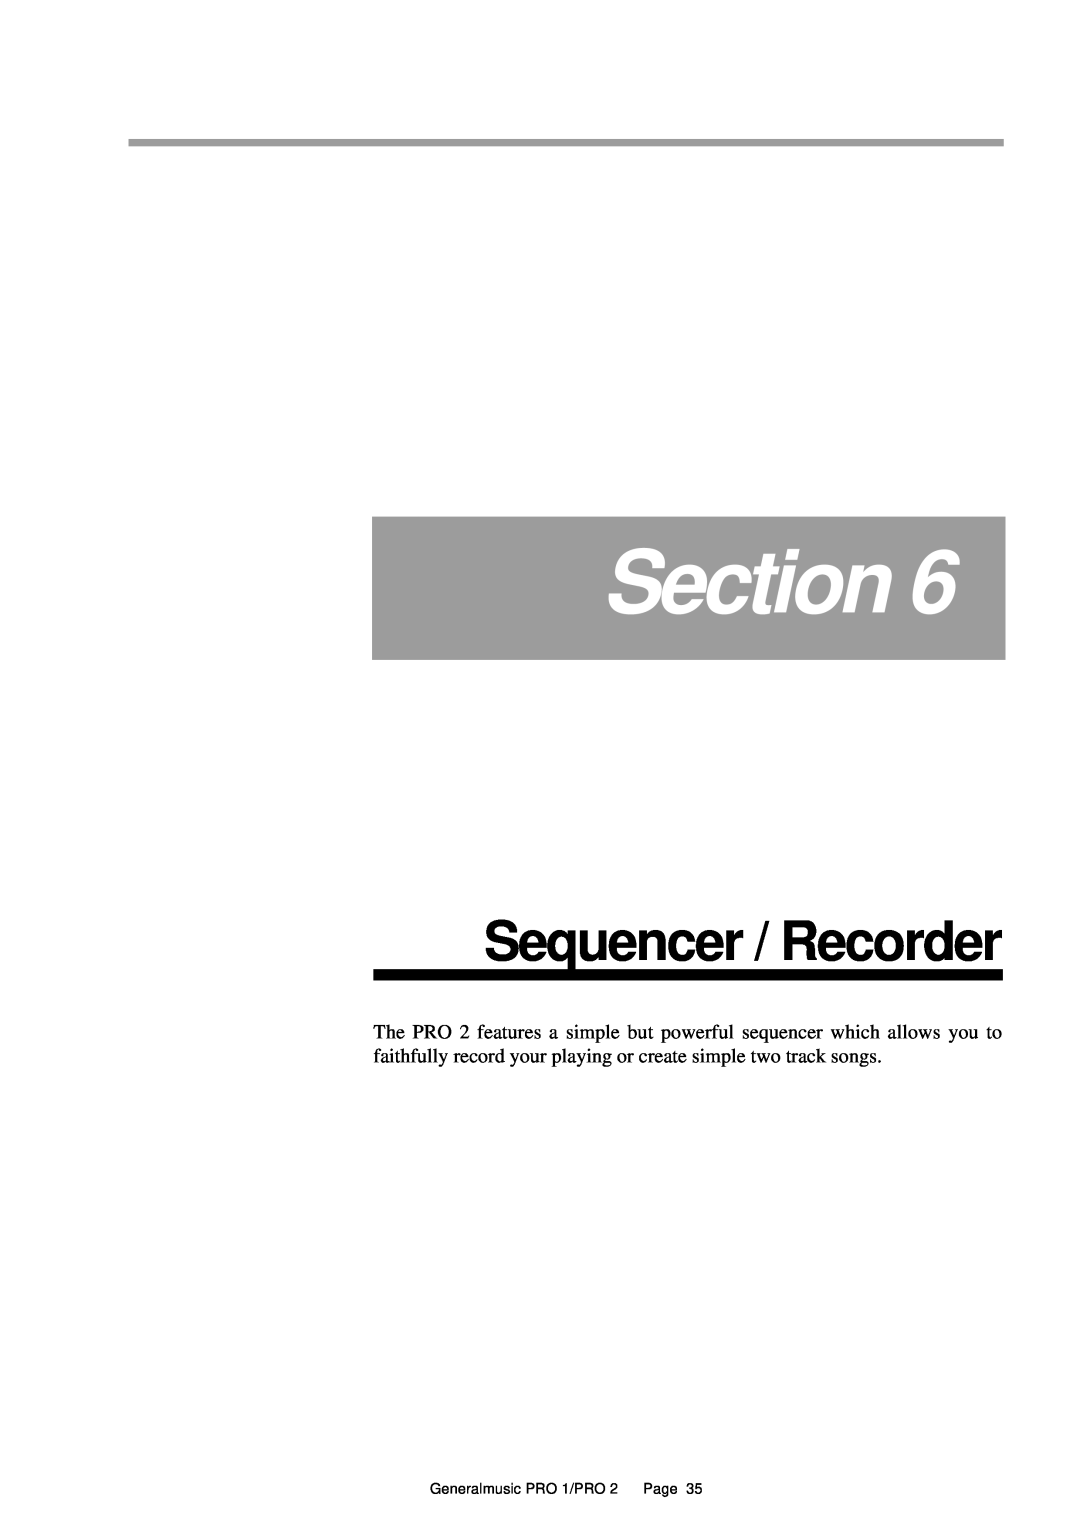 Peavey Pro 2, Pro 1 owner manual Sequencer / Recorder, Section, Generalmusic PRO 1/PRO 2 Page 